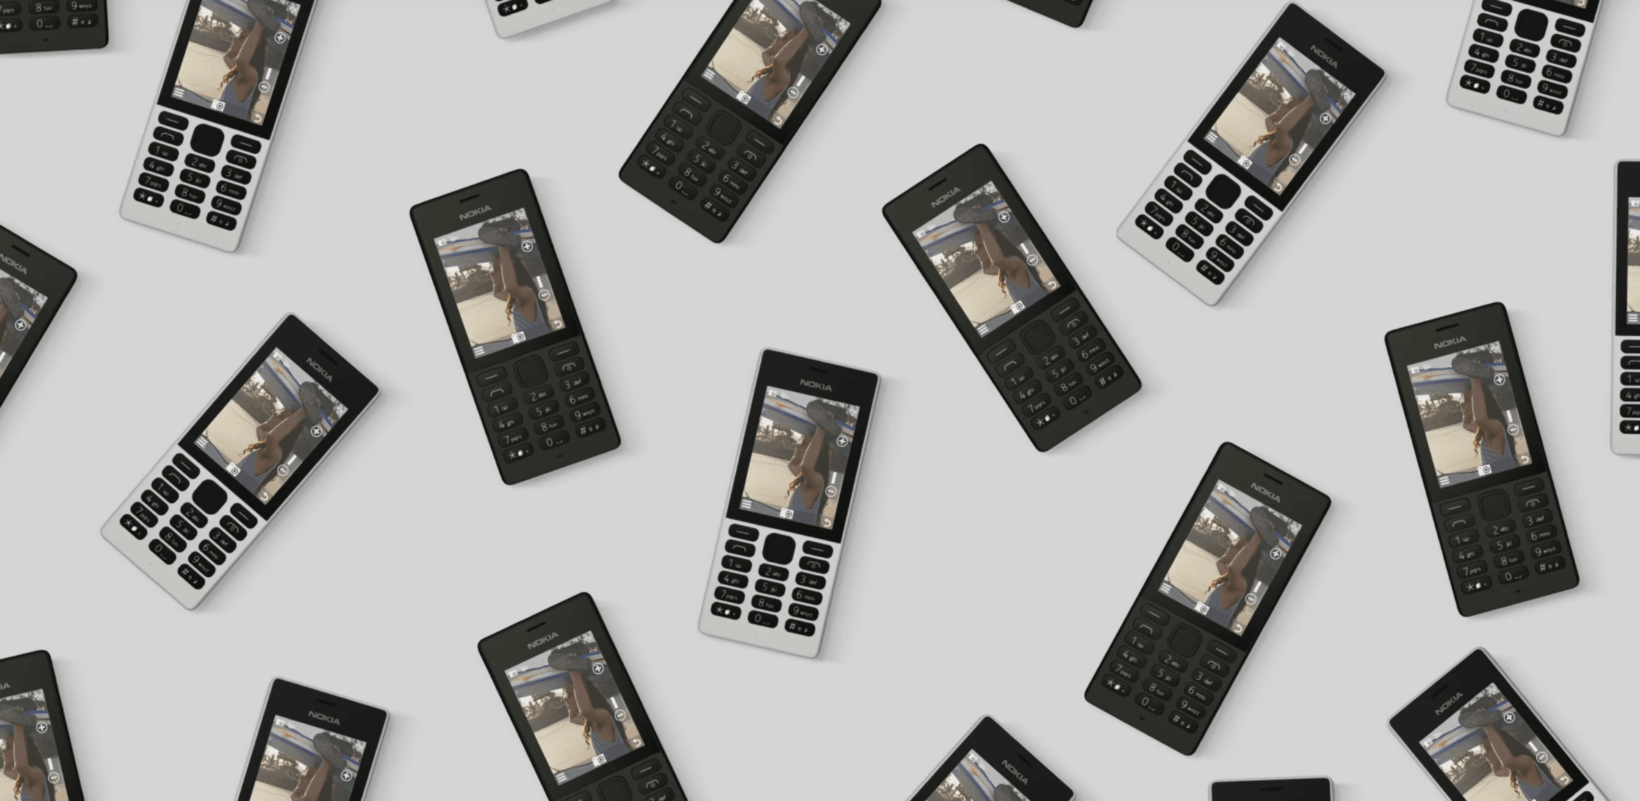 Nokia drops a modest feature phone that'll cost you a measly $26